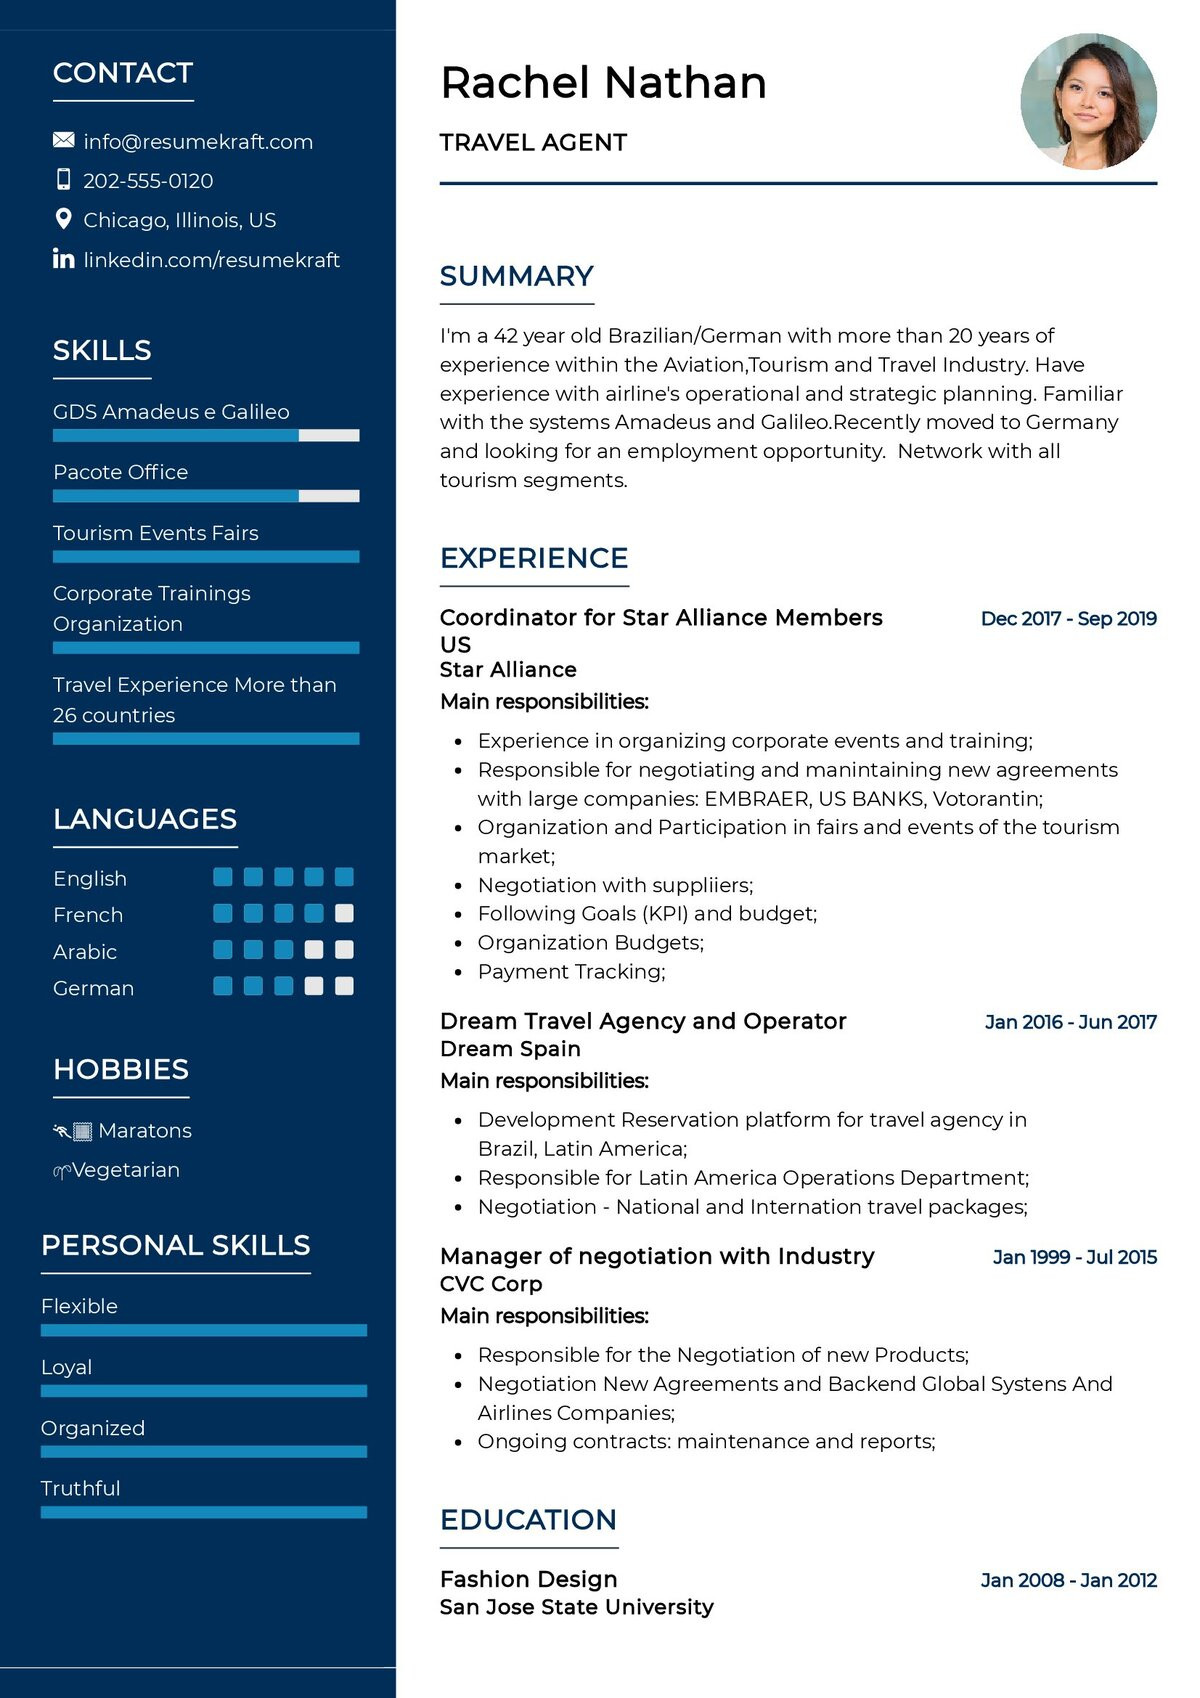 Sample Of Resume while Travelling for A Year Travel Agent Resume Template 2022 Writing Tips – Resumekraft